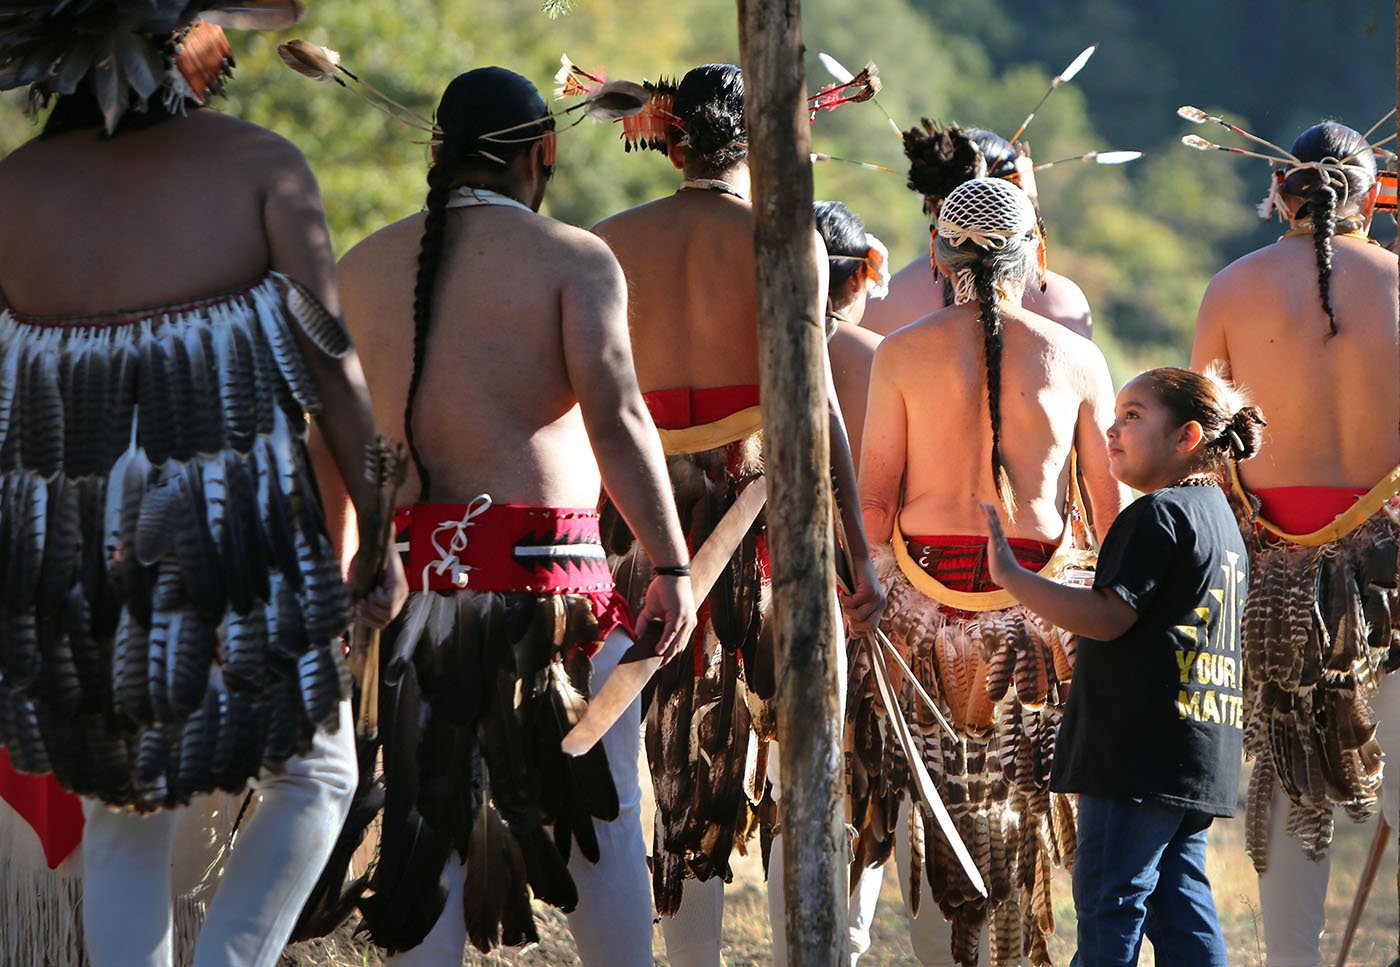  Lakehead, CA — Traditional dances are an important part of Winnemem Wintu culture. In 2004, with plans for a Shasta Dam Enlargement Project moving forward, they decided to do a war dance for the first time in more than 100 years. September 30, 2018.